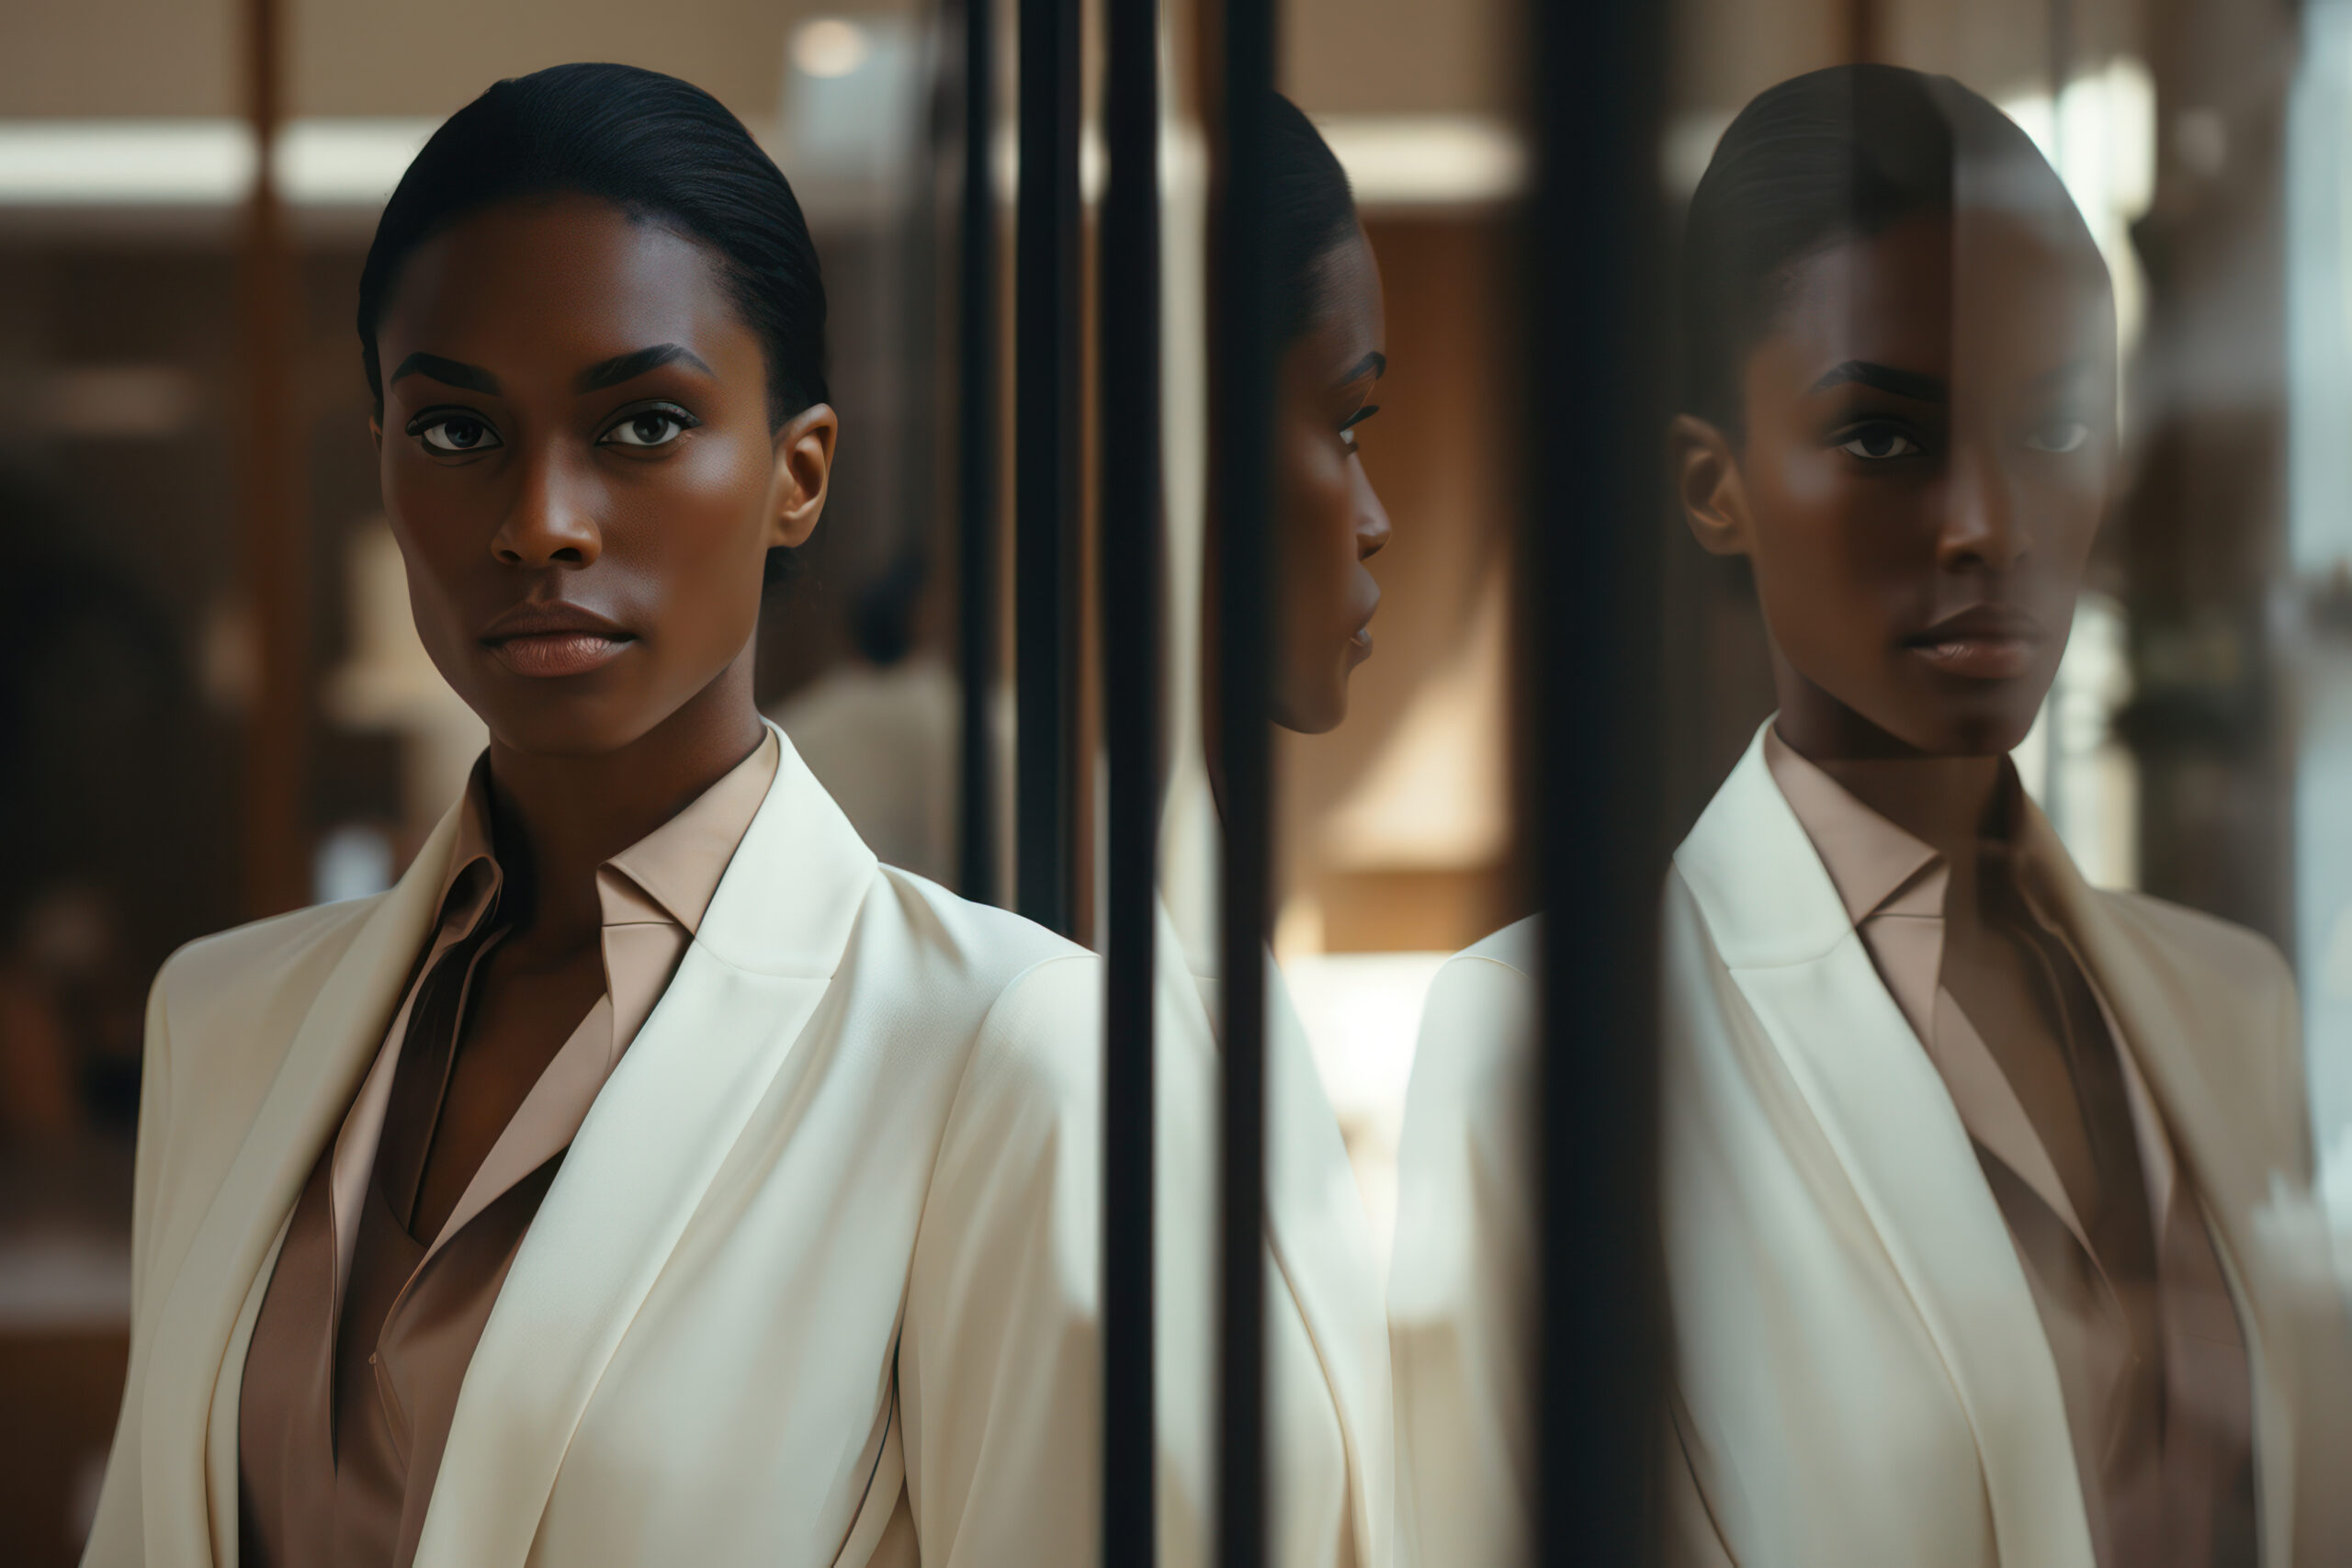 A confident woman in a chic beige blazer gazes intently at her reflection in a glass pane, embodying self-reflection and the power of self-belief.